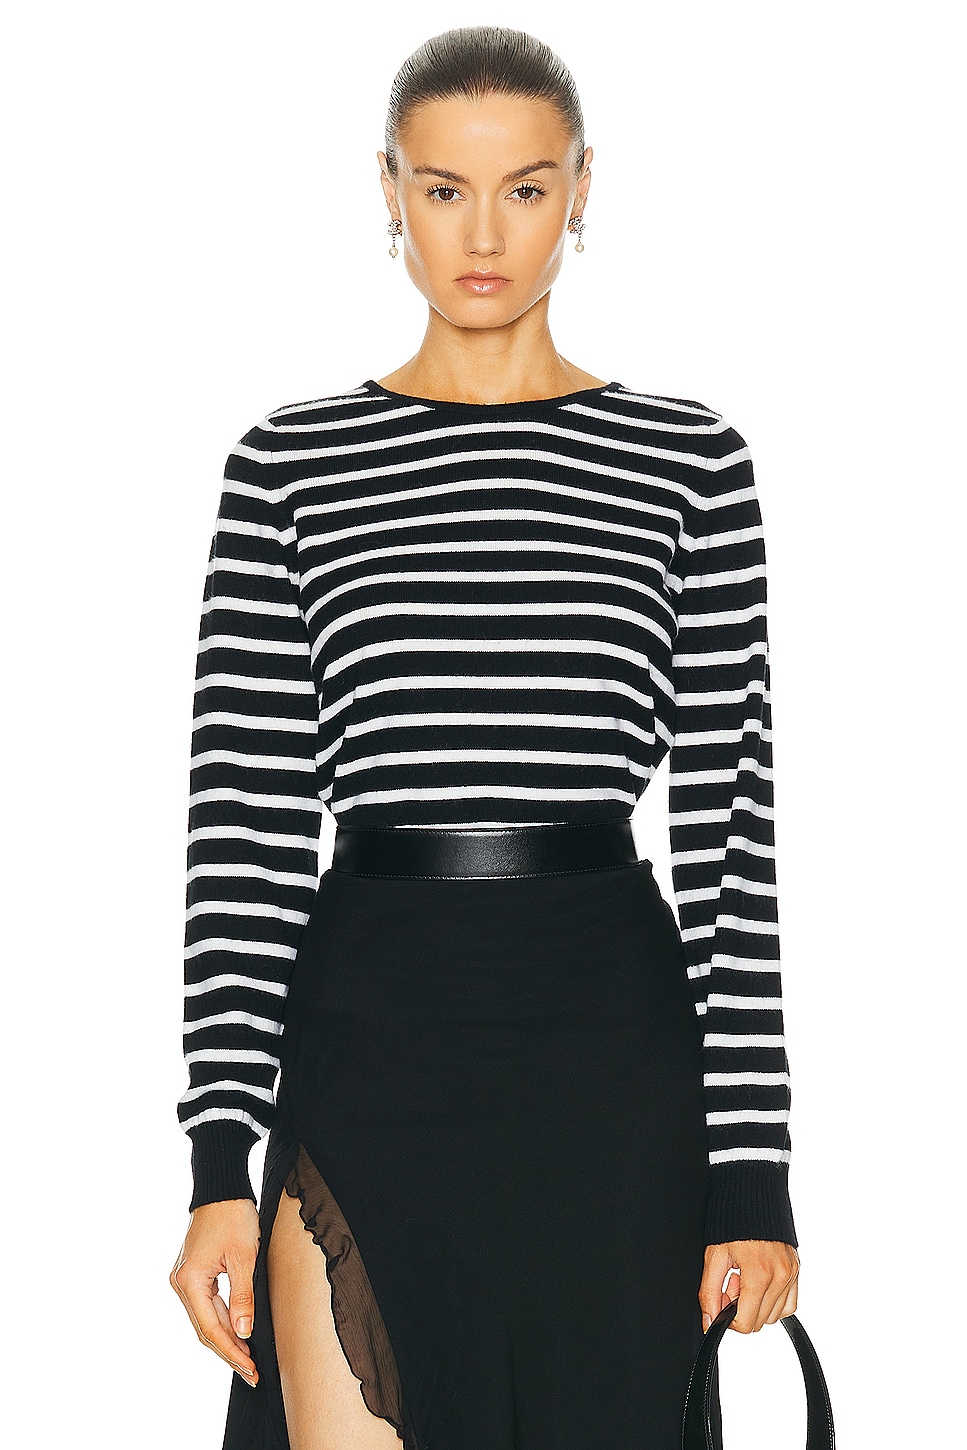 Image 1 of FWRD Renew Chanel Striped Sweater in Black & White